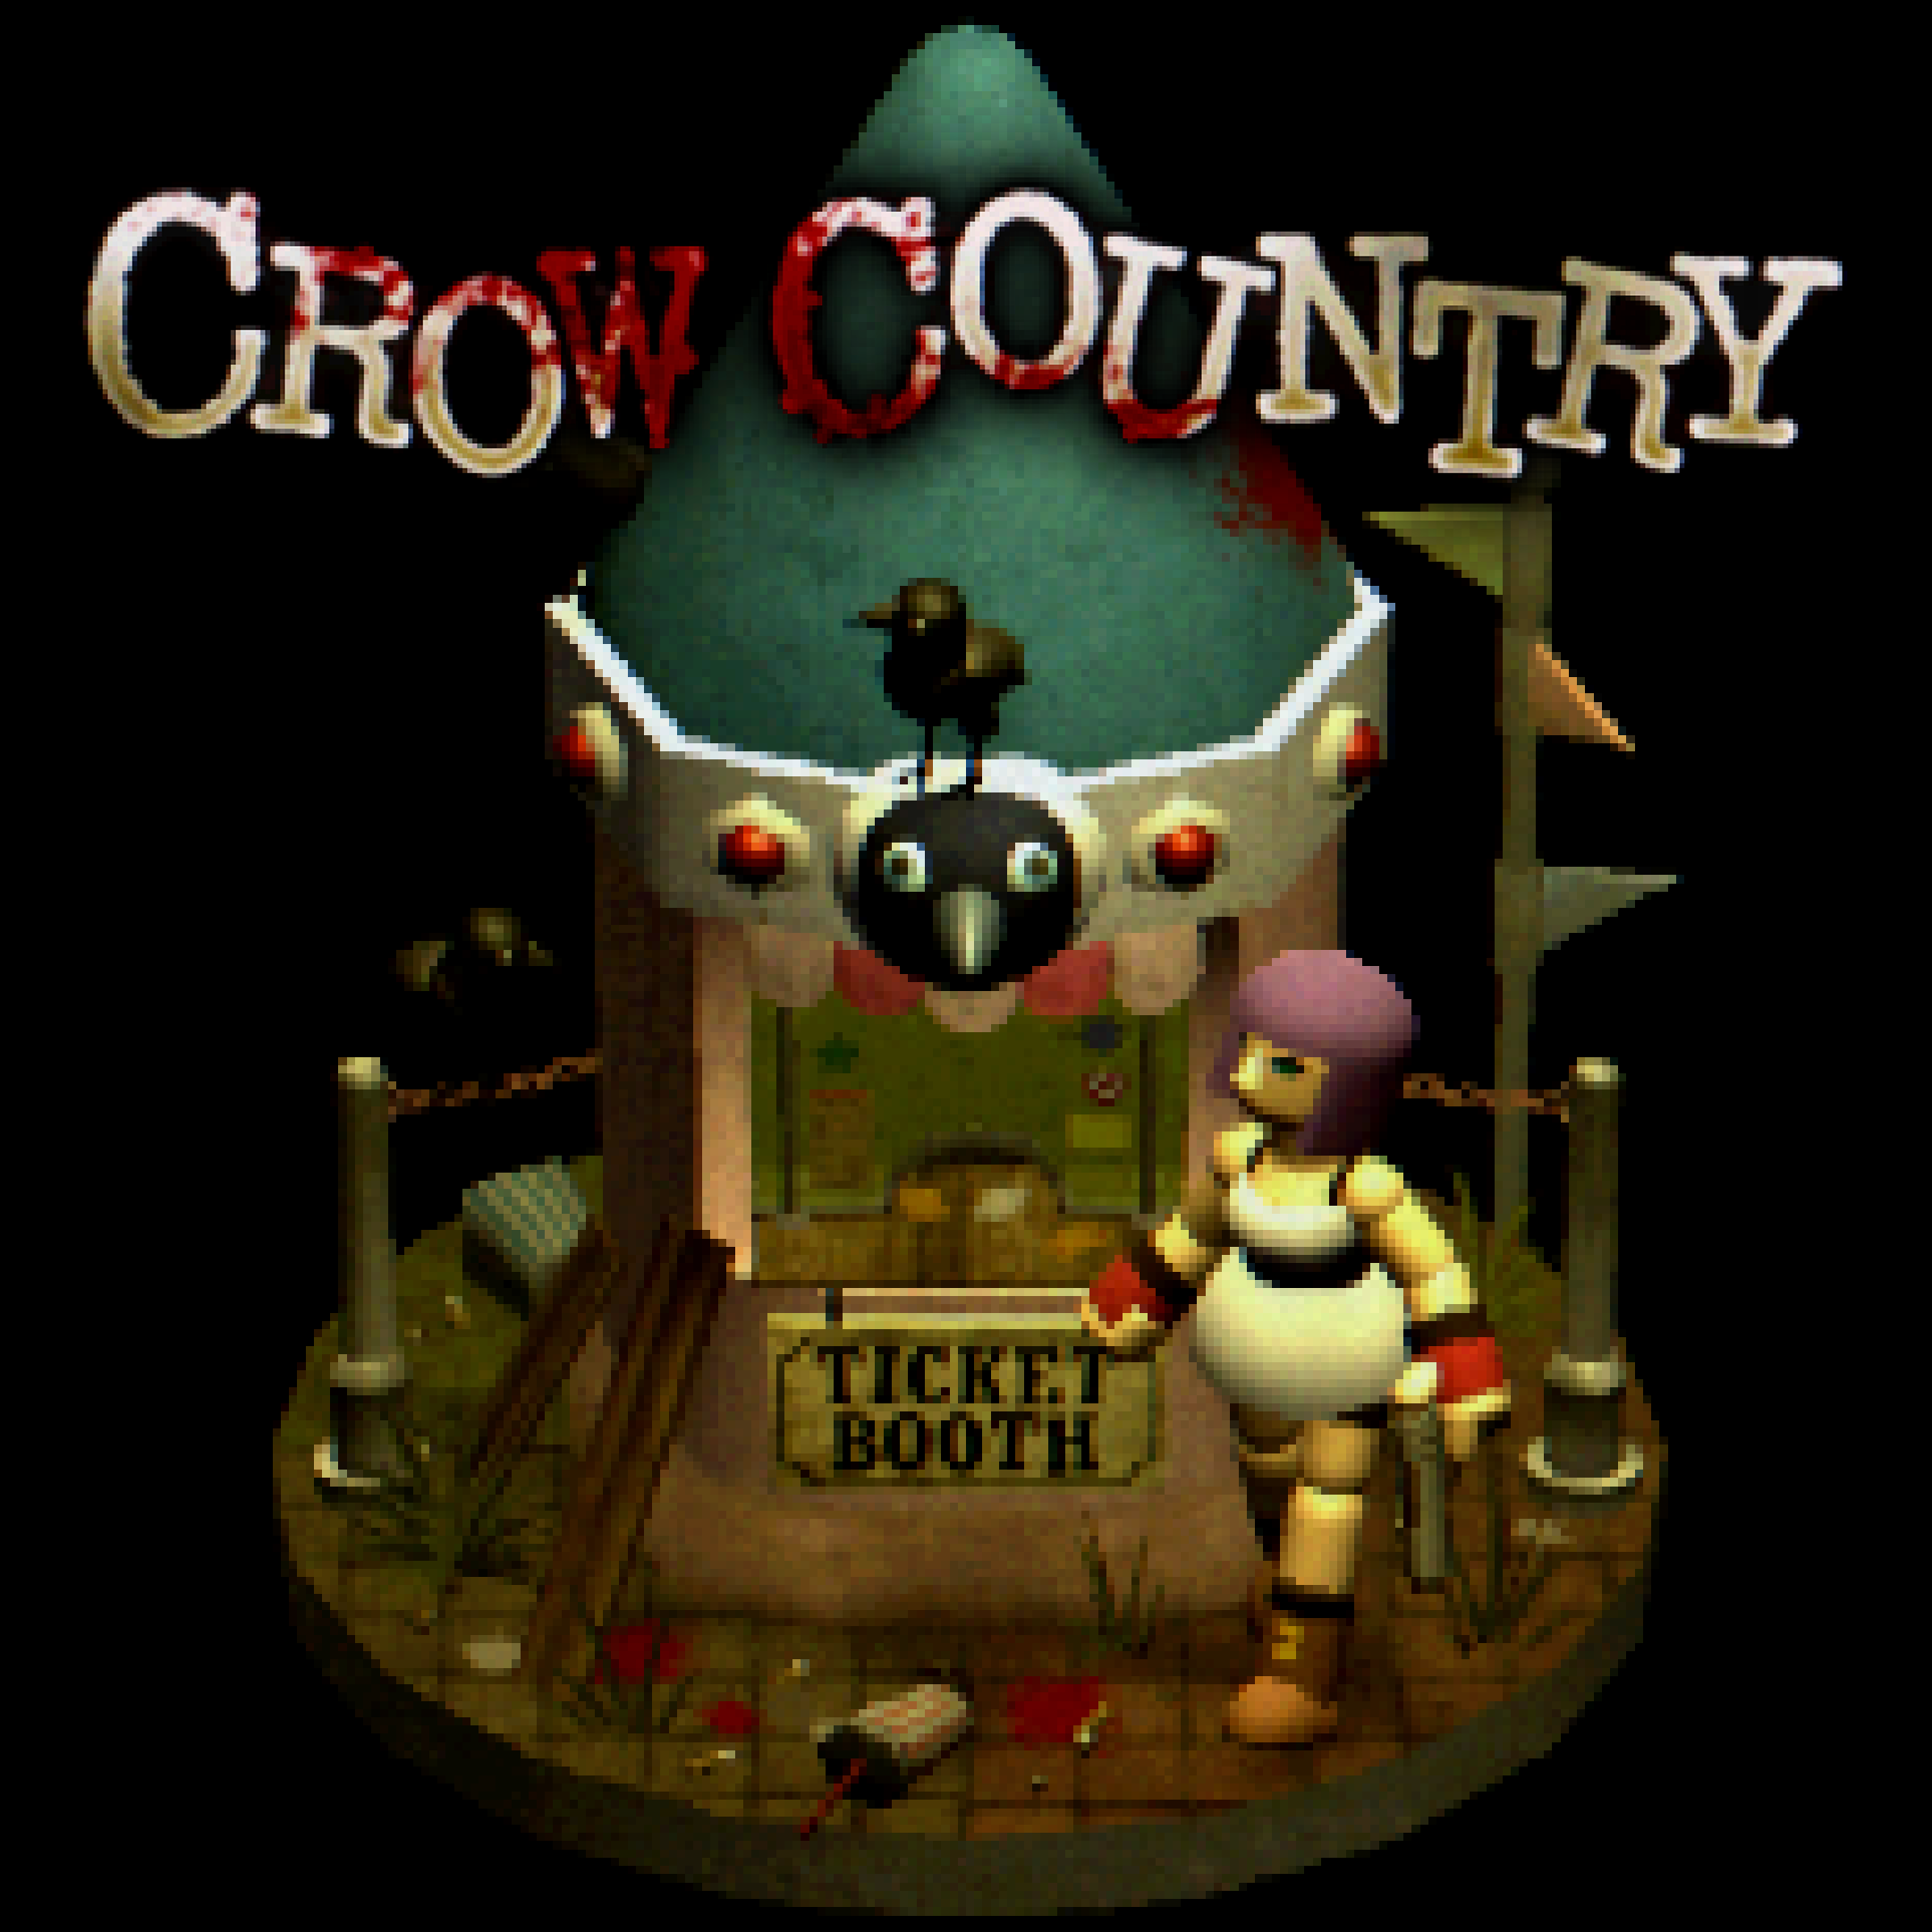 Crow Country Demo